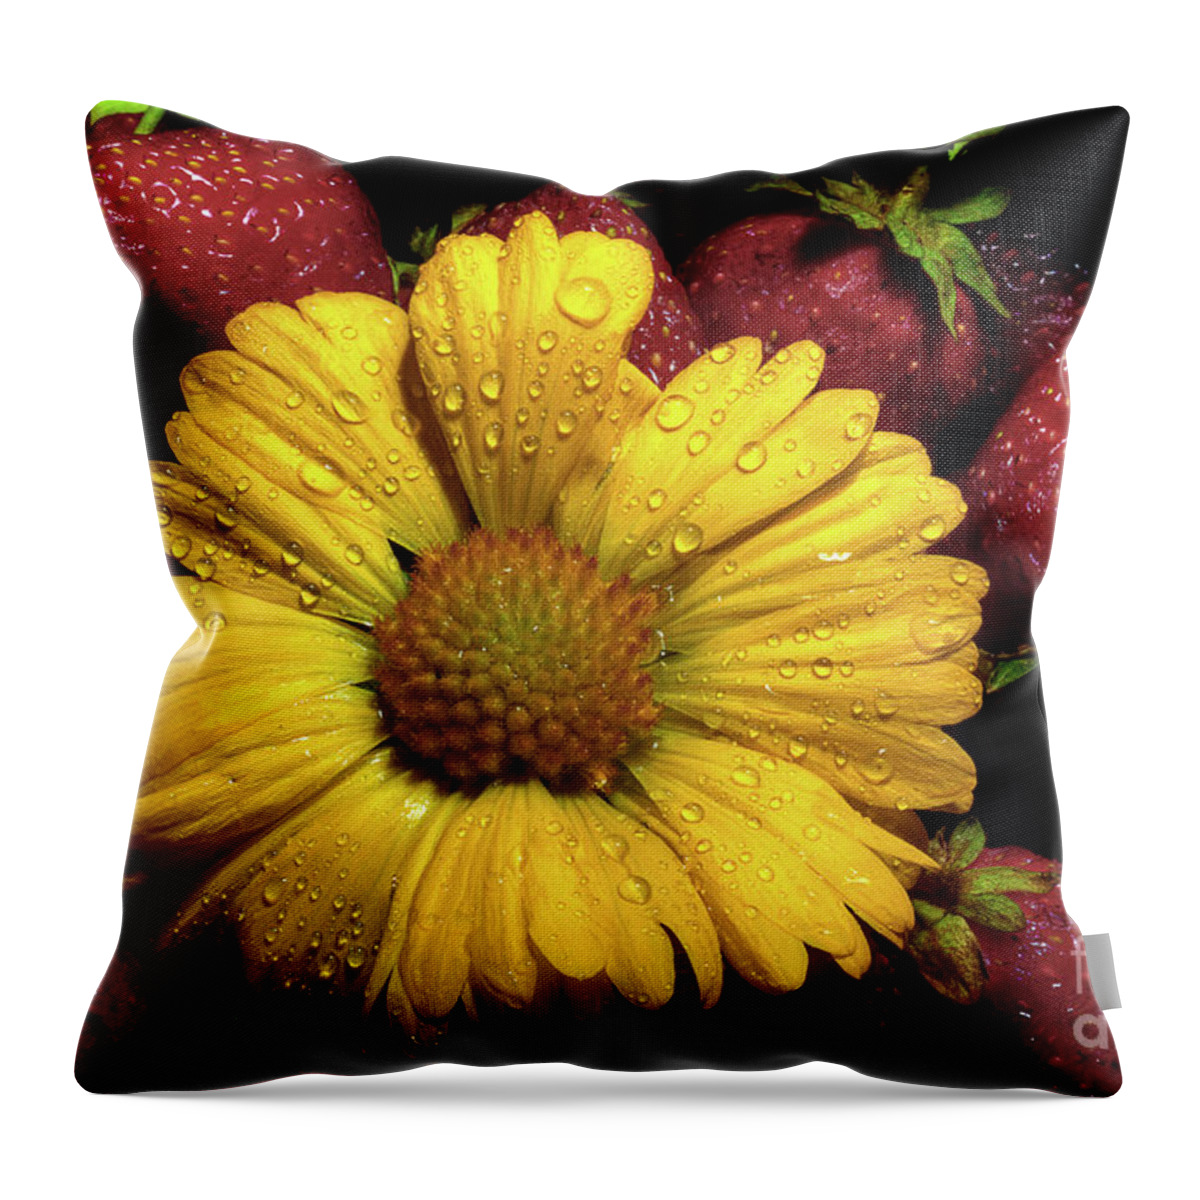 Daisy Throw Pillow featuring the photograph A Little Sunshine In The Morning by Michael Eingle